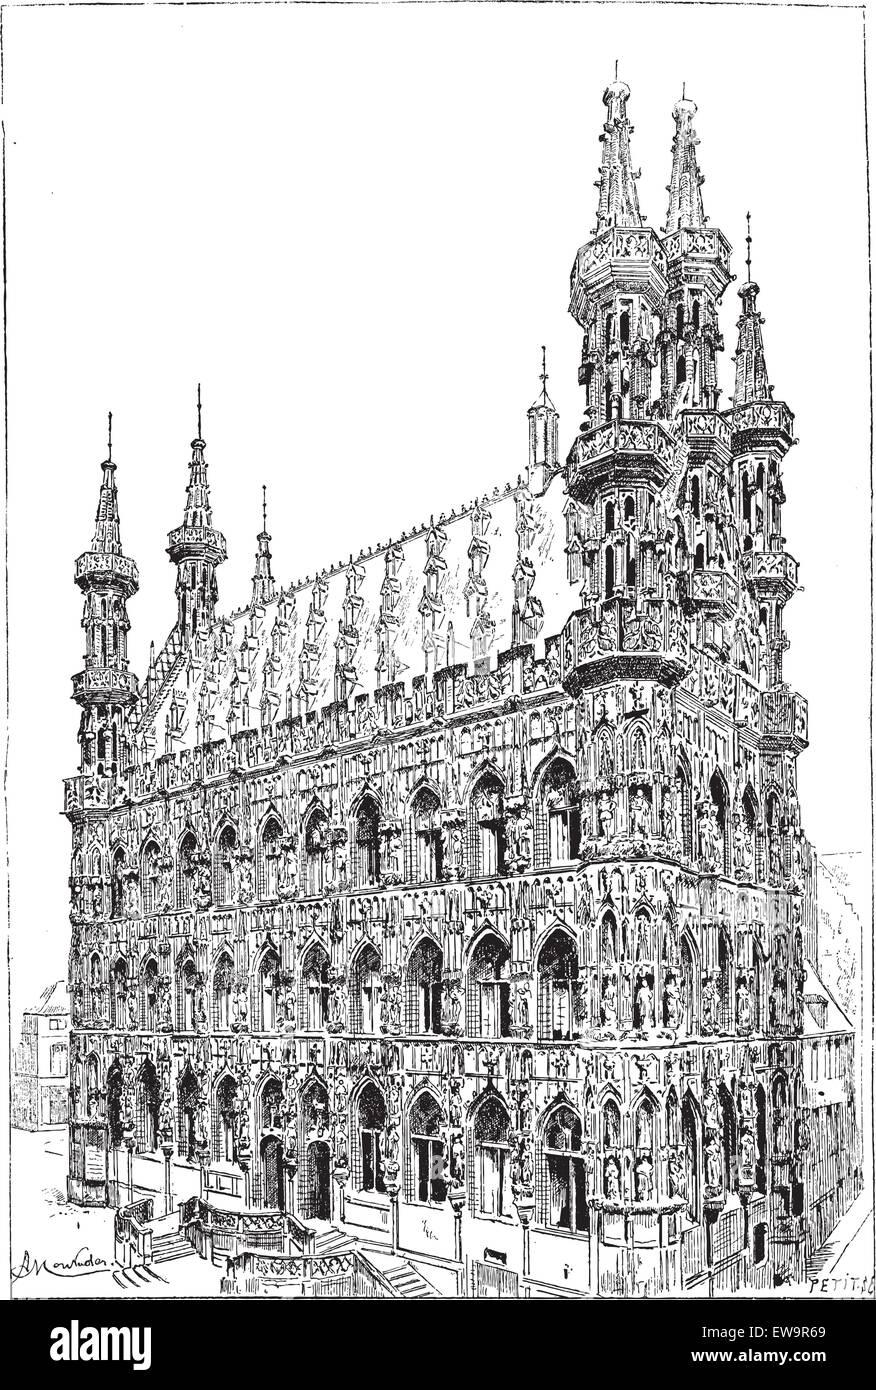 Leuven town hall, vintage engraved illustration. Dictionary of words and things - Larive and Fleury - 1895. Stock Vector